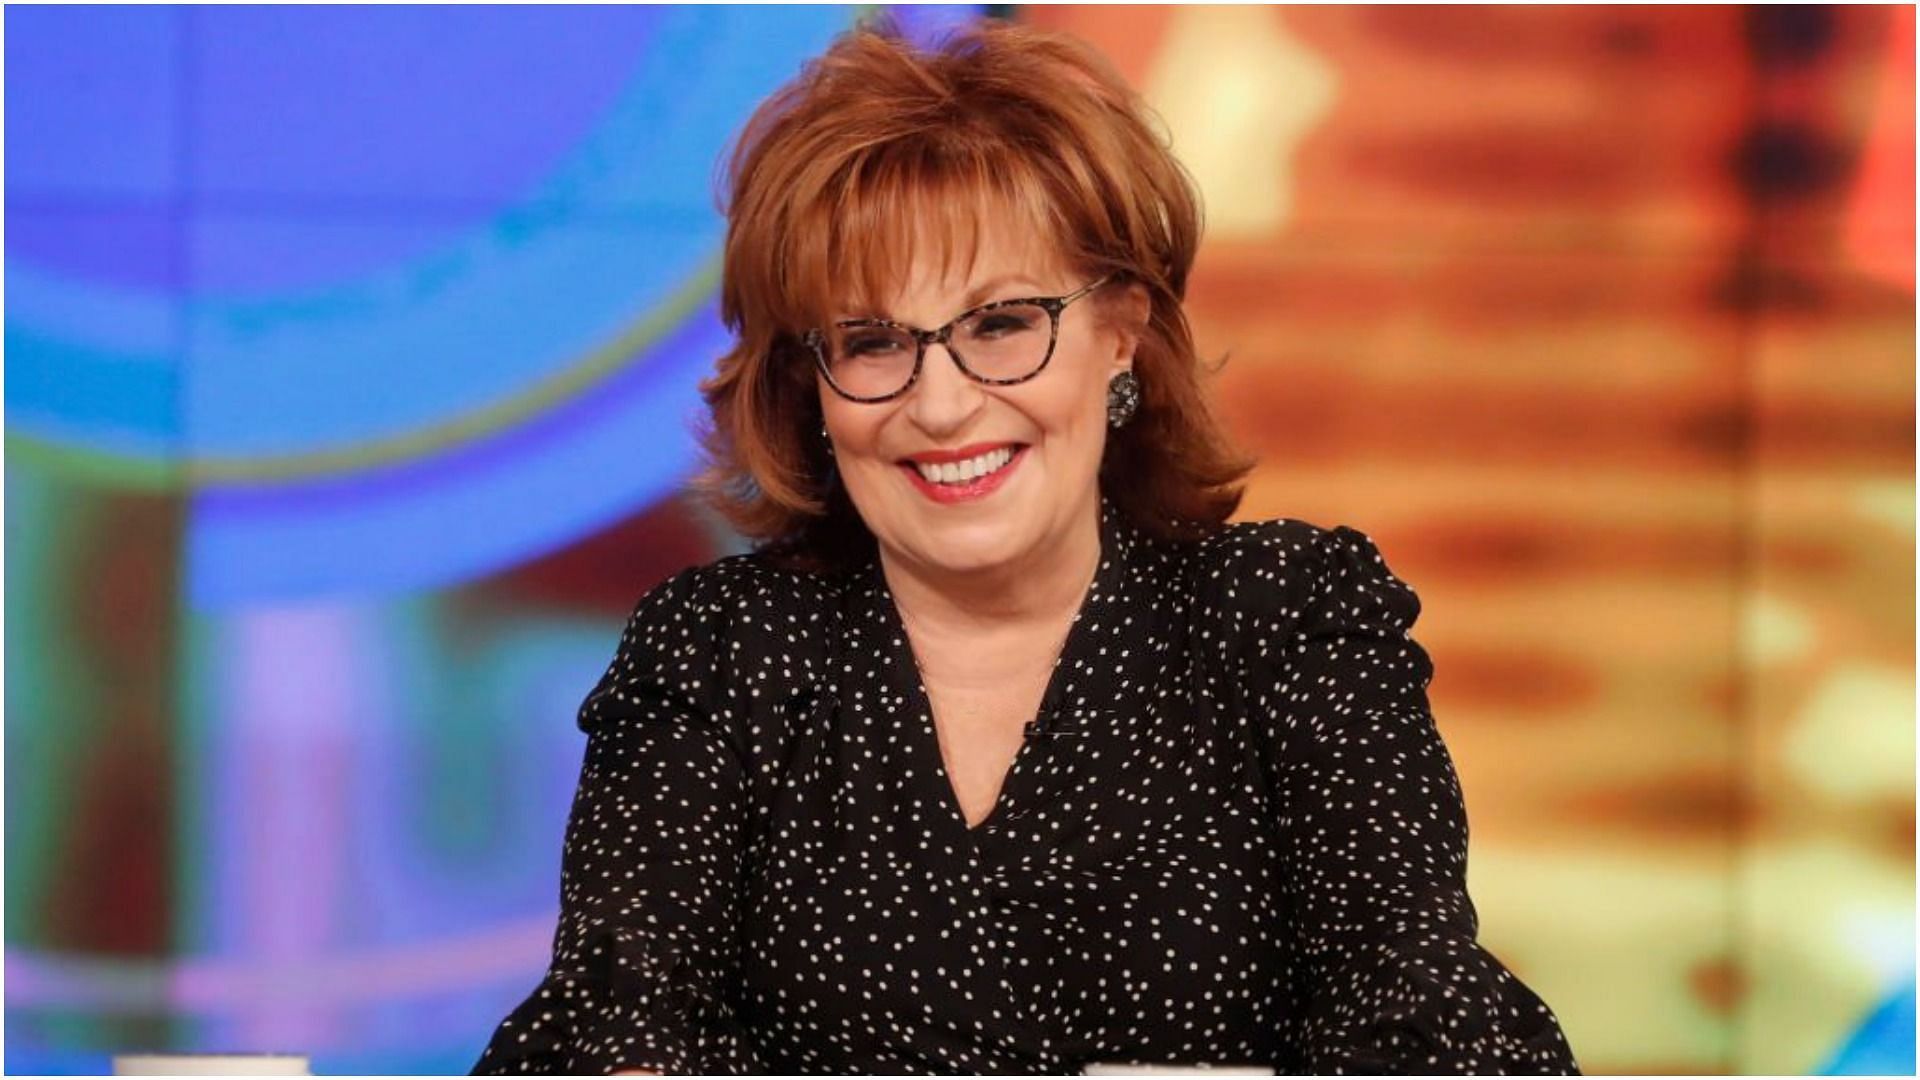 Joy Behar was worried about her European vacation, which was not liked by the public (Image via Lou Rocco/Getty Images)